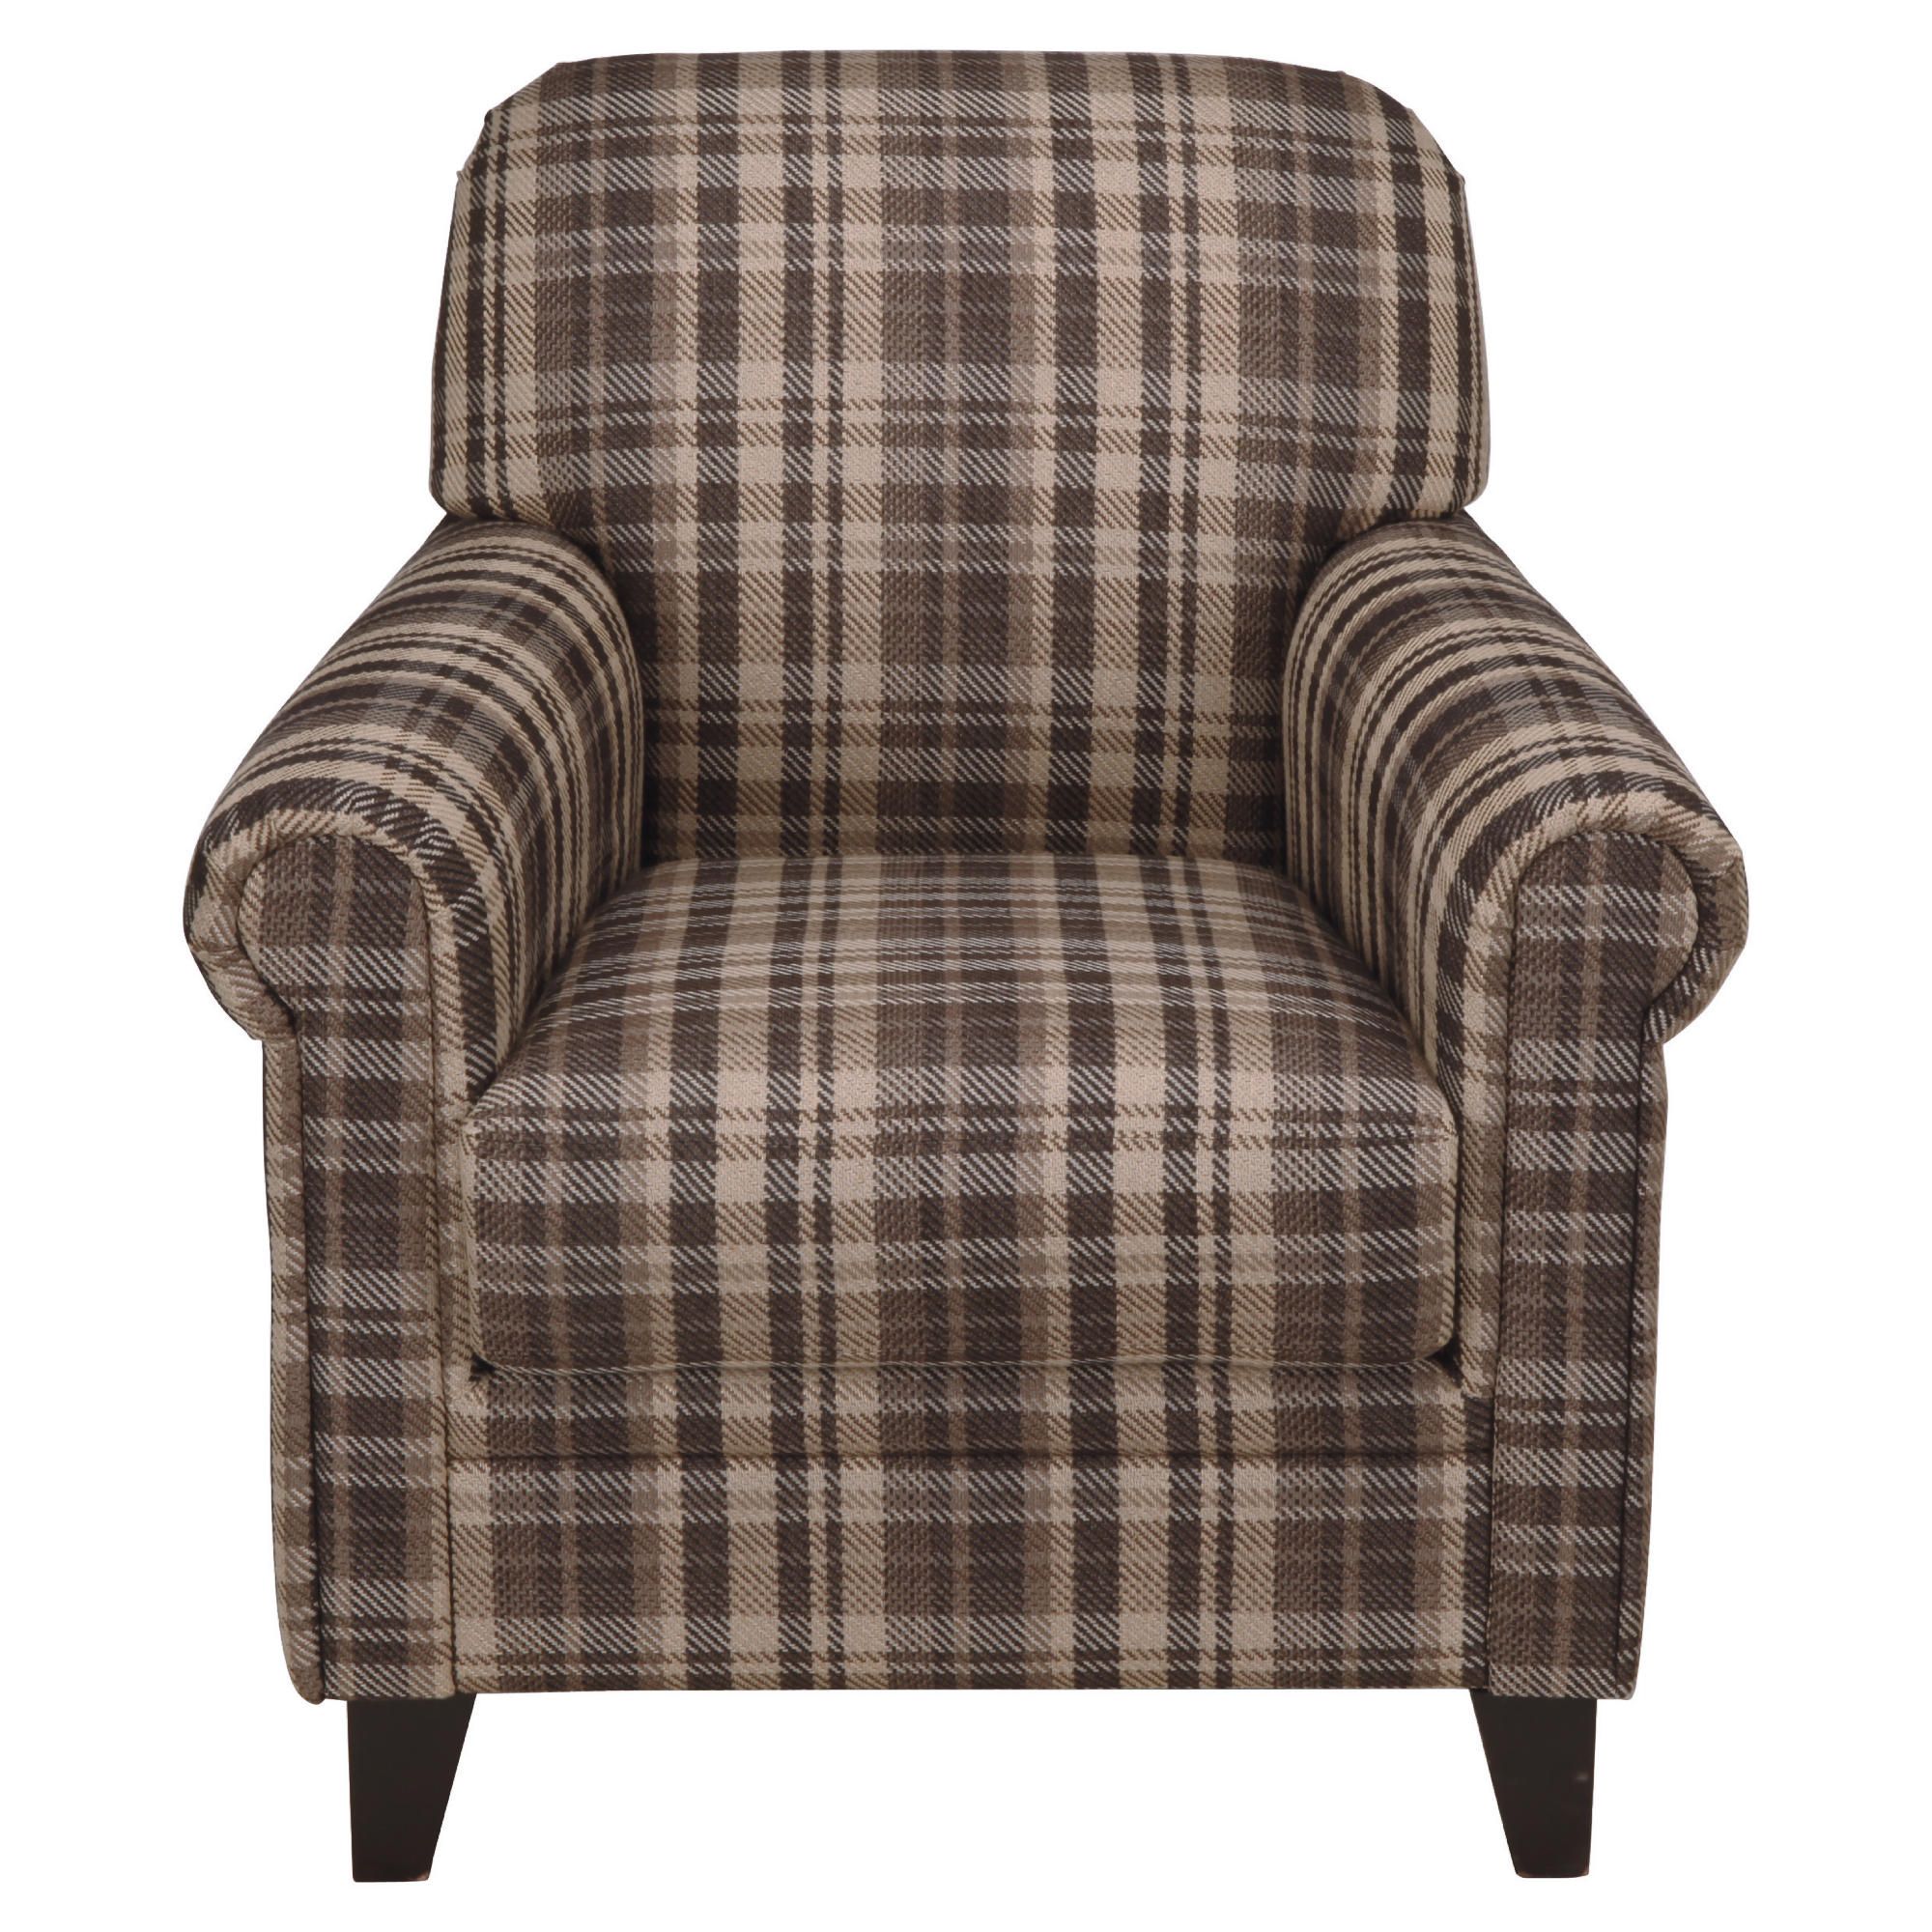 Maurice Fabric Chair, Chocolate Check at Tesco Direct